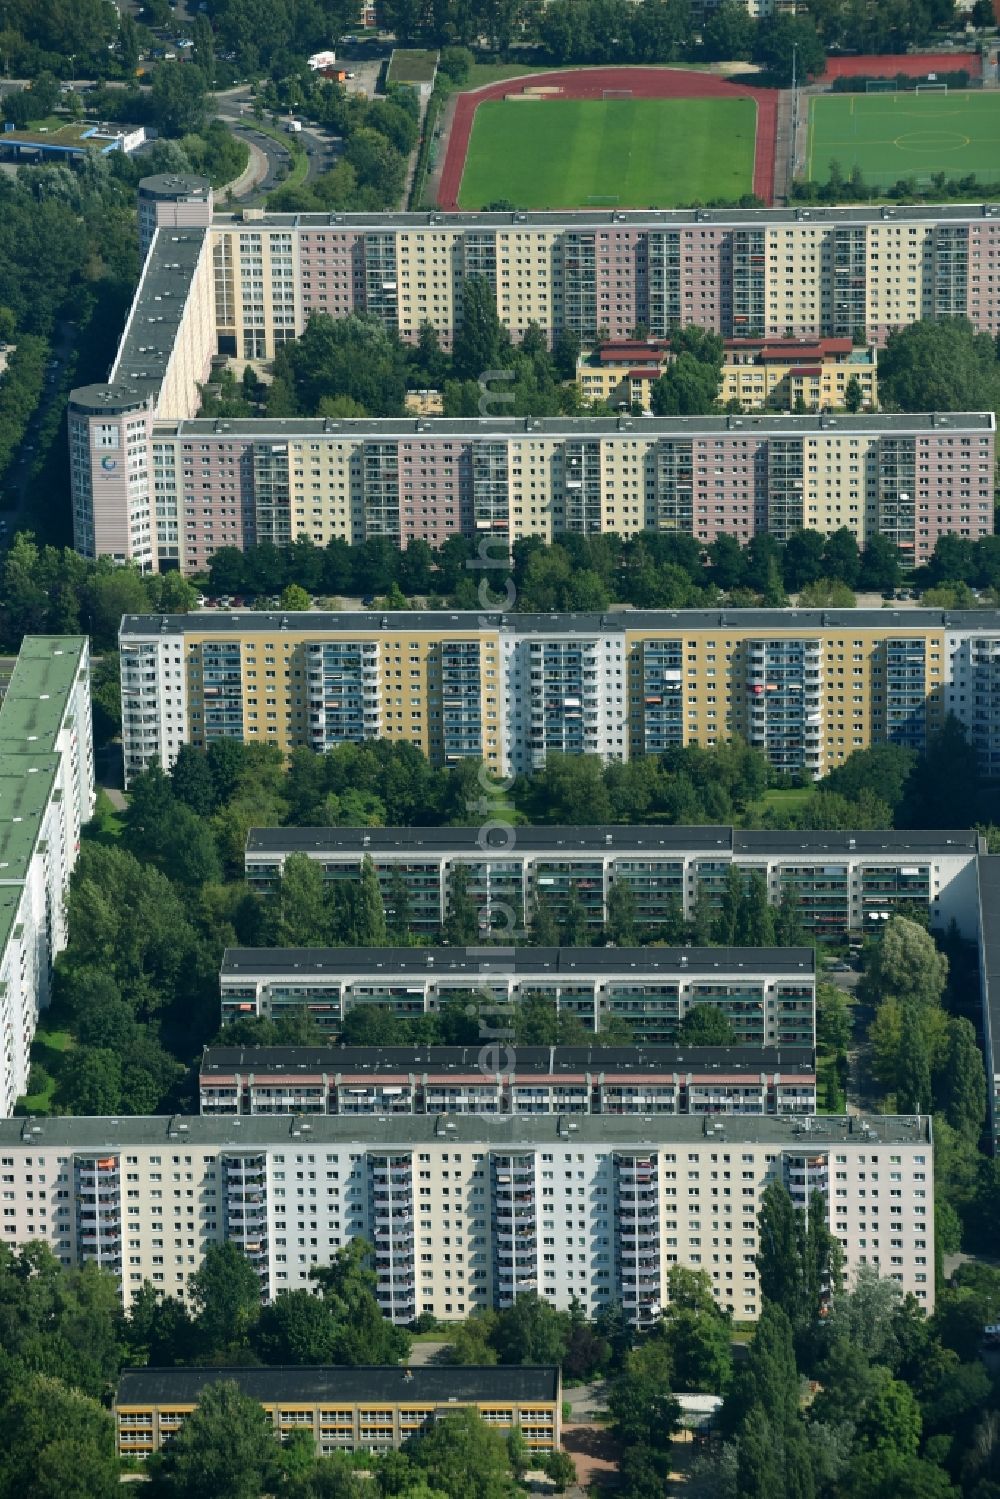 Berlin from the bird's eye view: Skyscrapers in the residential area of industrially manufactured settlement on Raoul-Wallenberg-Strasse in the district Marzahn in Berlin, Germany